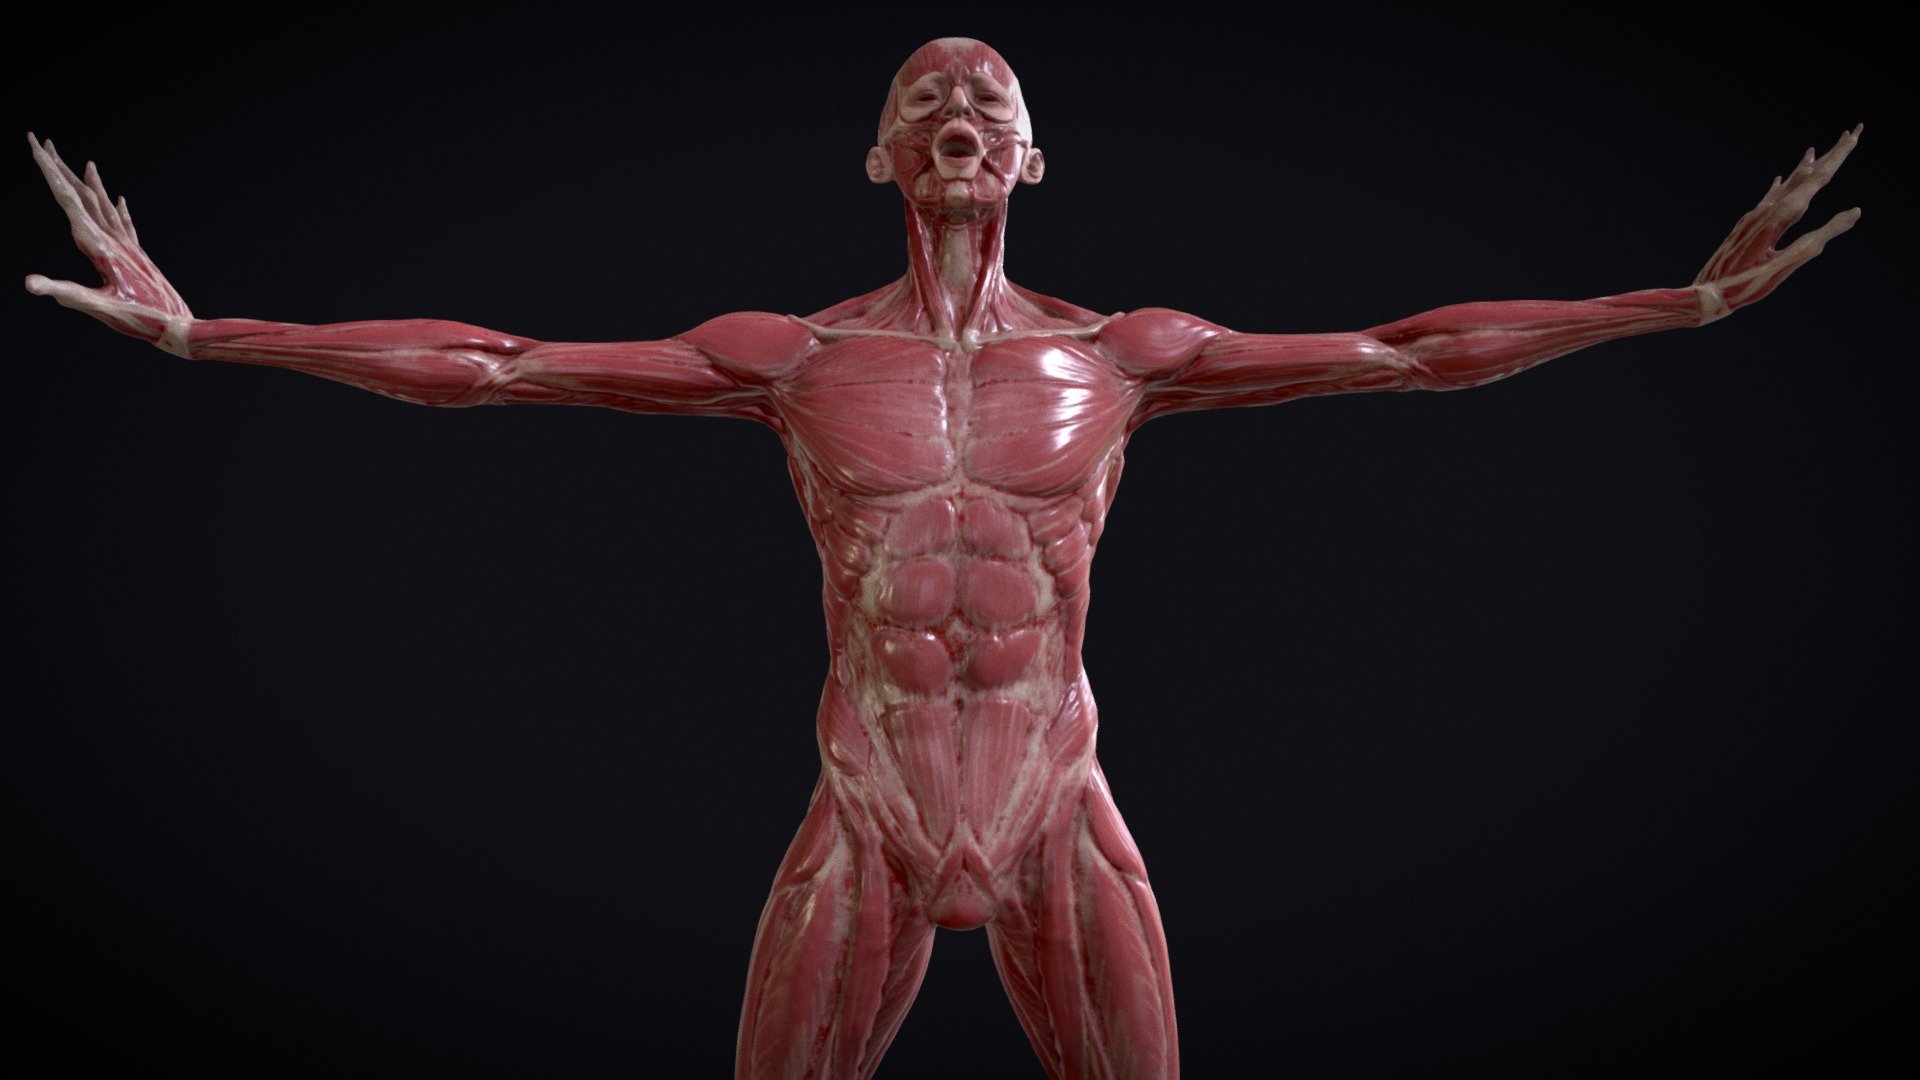 General anatomy study of muscles and tendoms. 
This reference hace been made as a reference for artistic studies. 

The Character have been sculpted in blender, and textured in substance painter. 
The current model is a decimated mesh to reduce the polycount, the original mesh it's clean and made with a clean and full quad topology 3d model